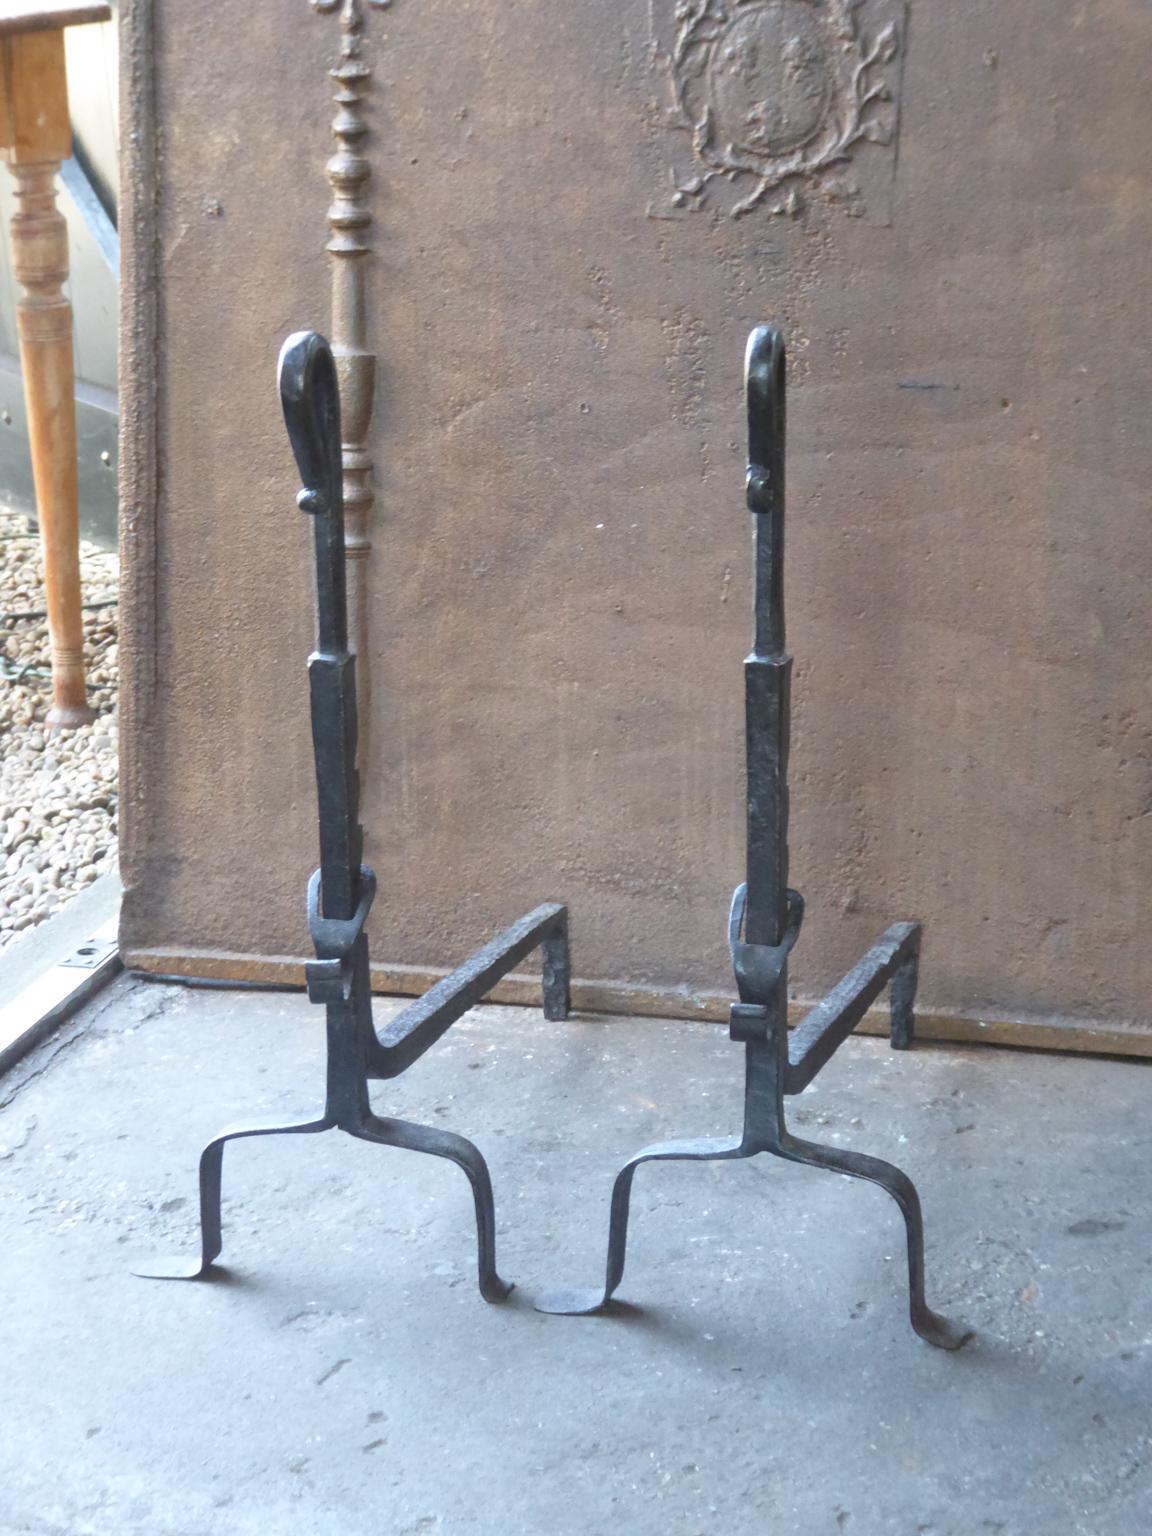 18th century French andirons, fire dogs made of wrought iron. These French andirons are called 'landiers' in France. This dates from the times the andirons were the main cooking equipment in the house. They had spit hooks to grill meat or poultry